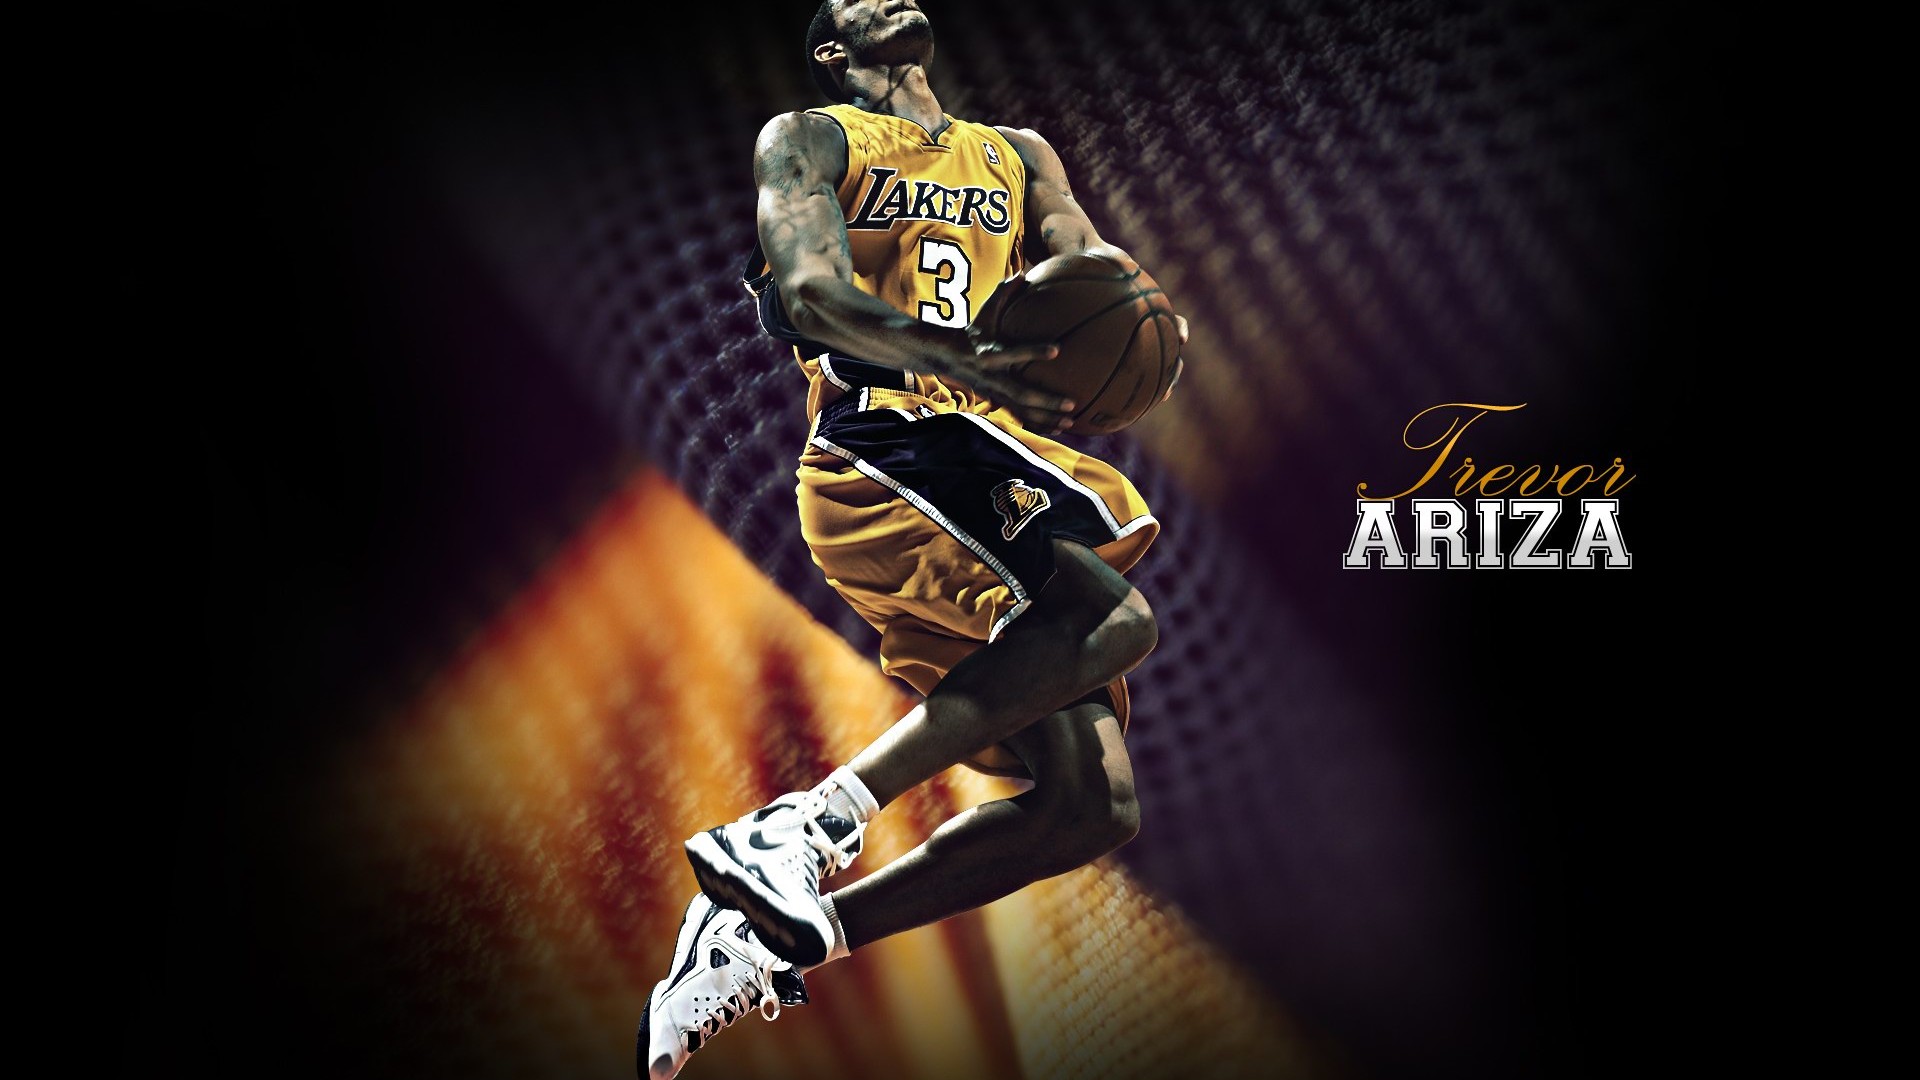 Los Angeles Lakers Wallpaper Oficial #26 - 1920x1080